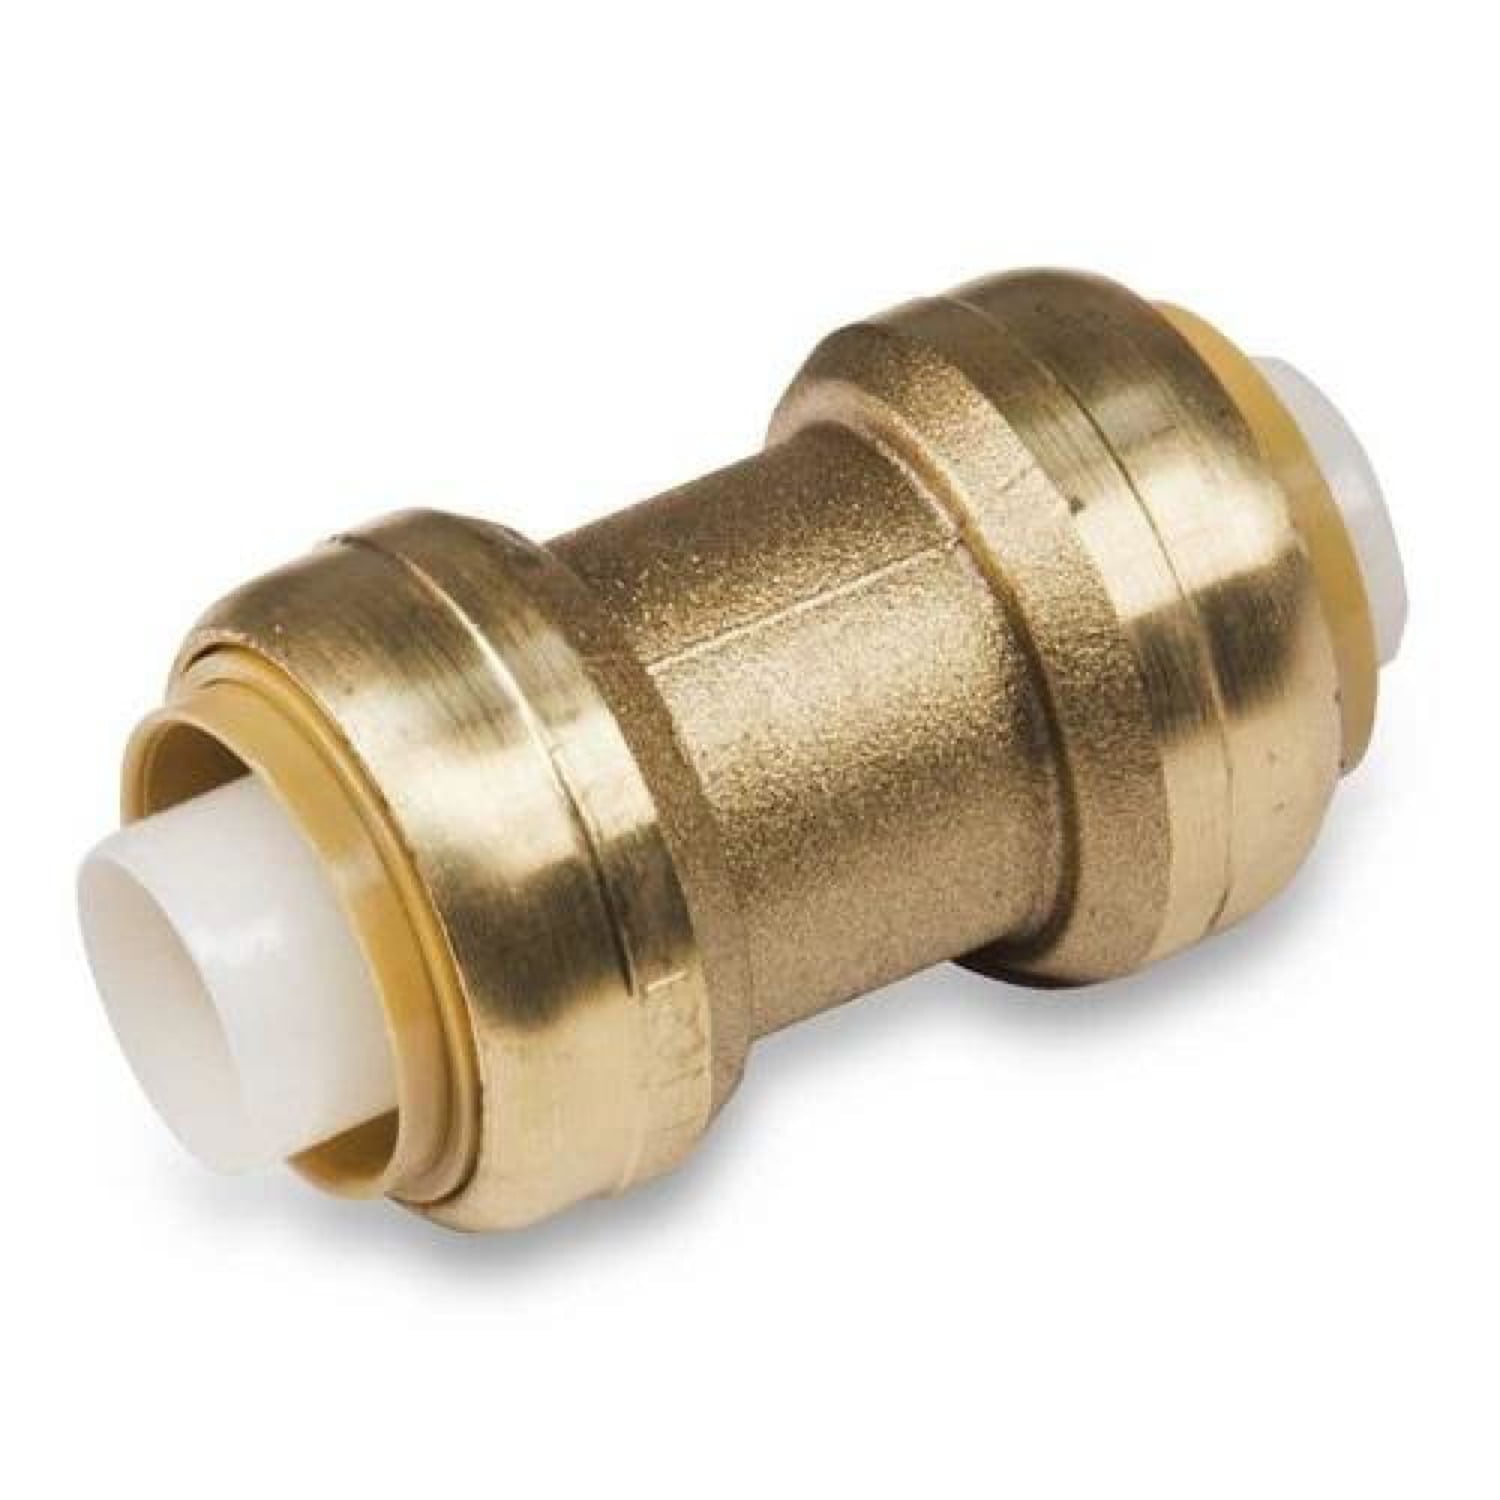 1/2" x 3/8" Sharkbite Style Push-Fit Lead-Free Brass Reducing Coupling Fitting 